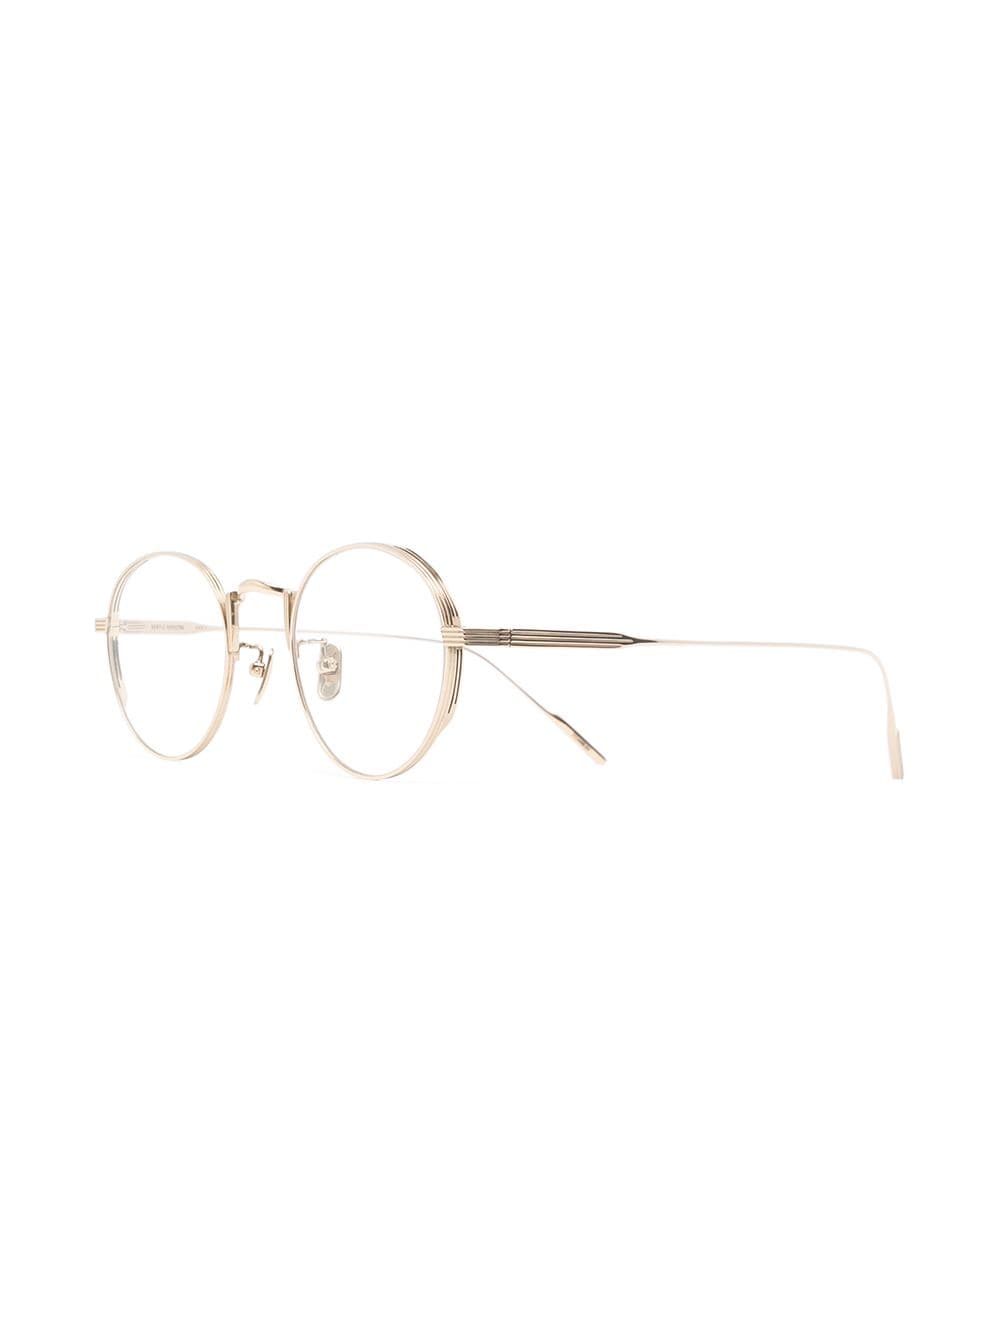 Image 2 of Gentle Monster Liberty X 031 round frame glasses